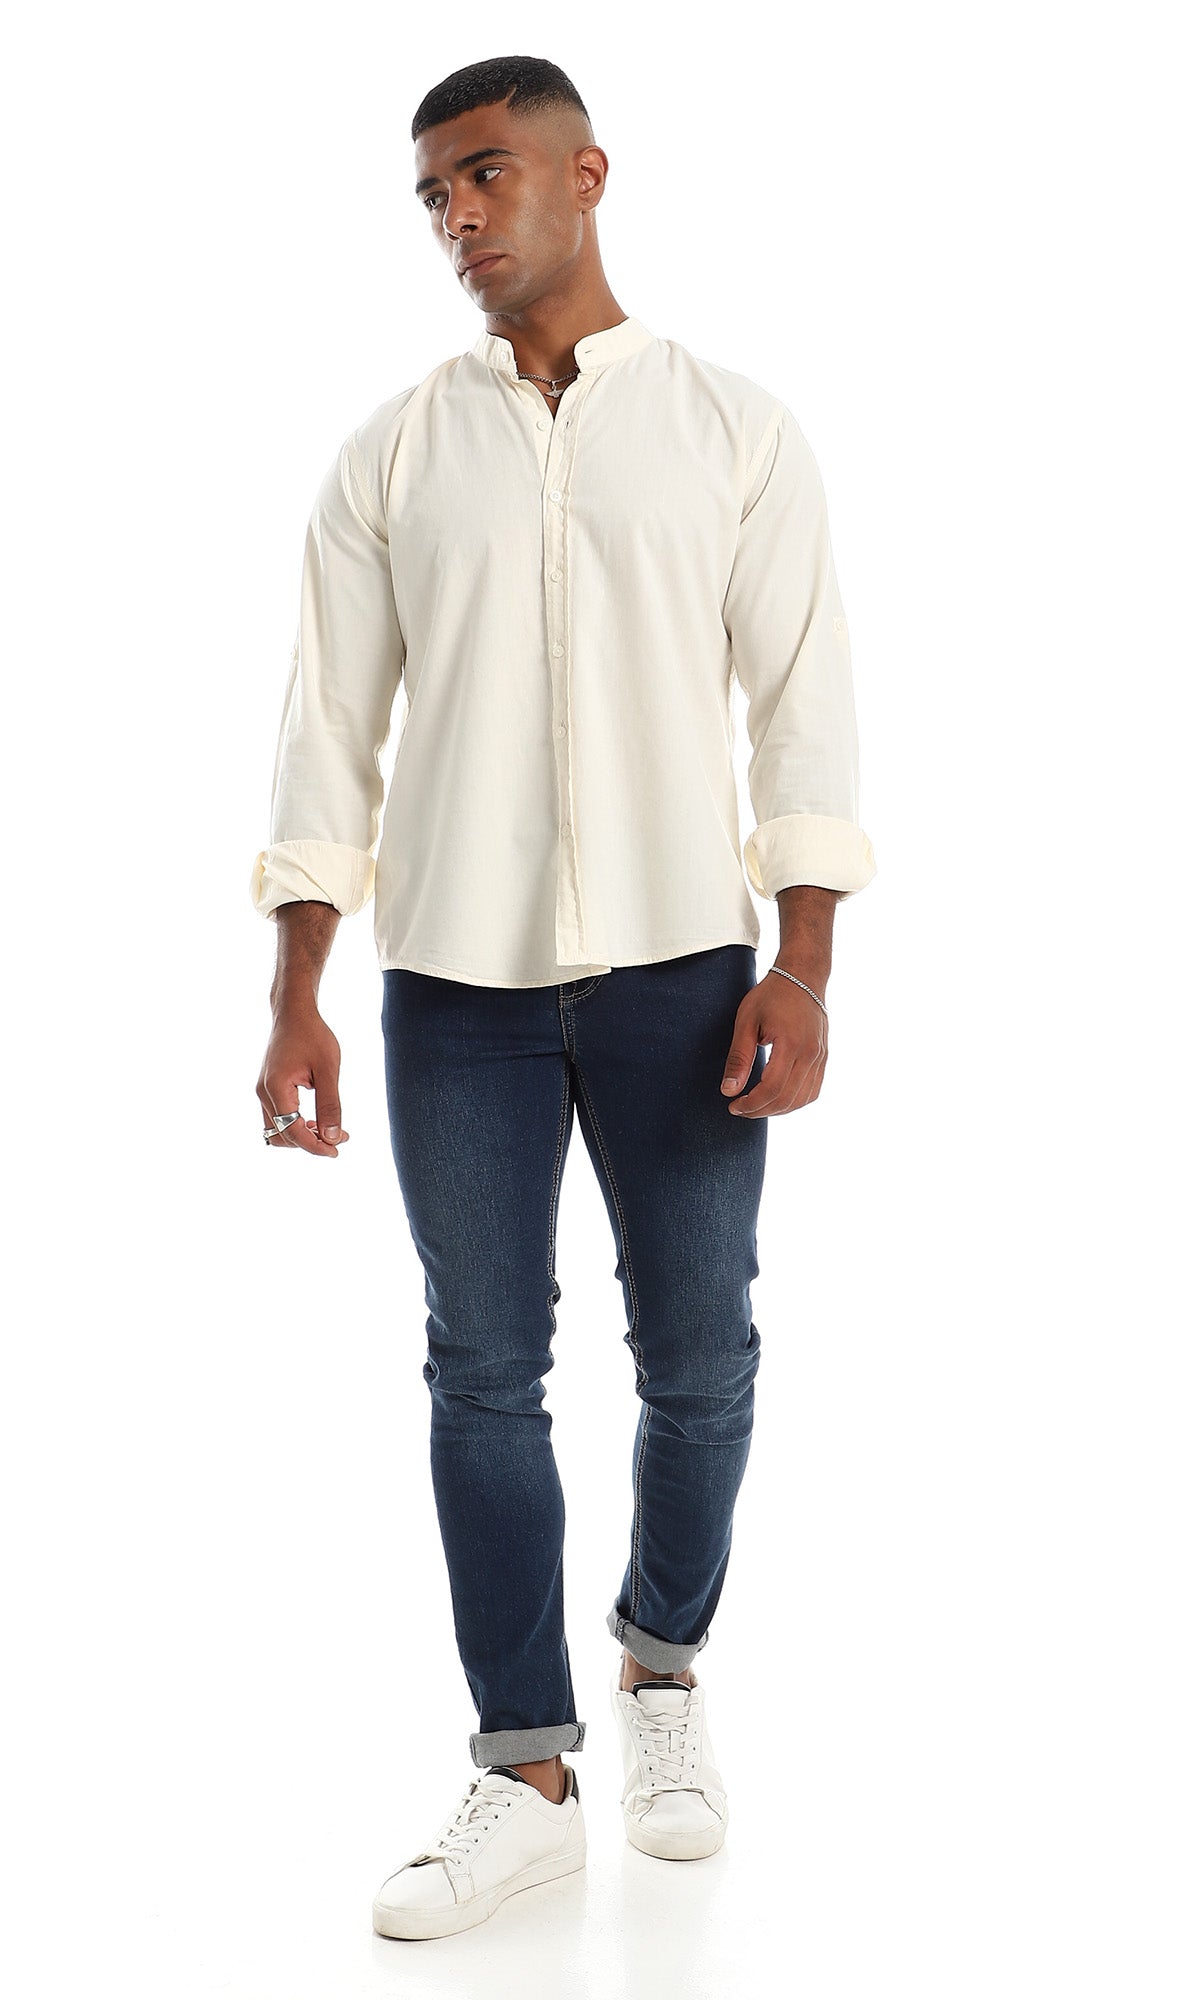 97238 Cotton Comfy Long Sleeves Button Down Shirt - Off-White